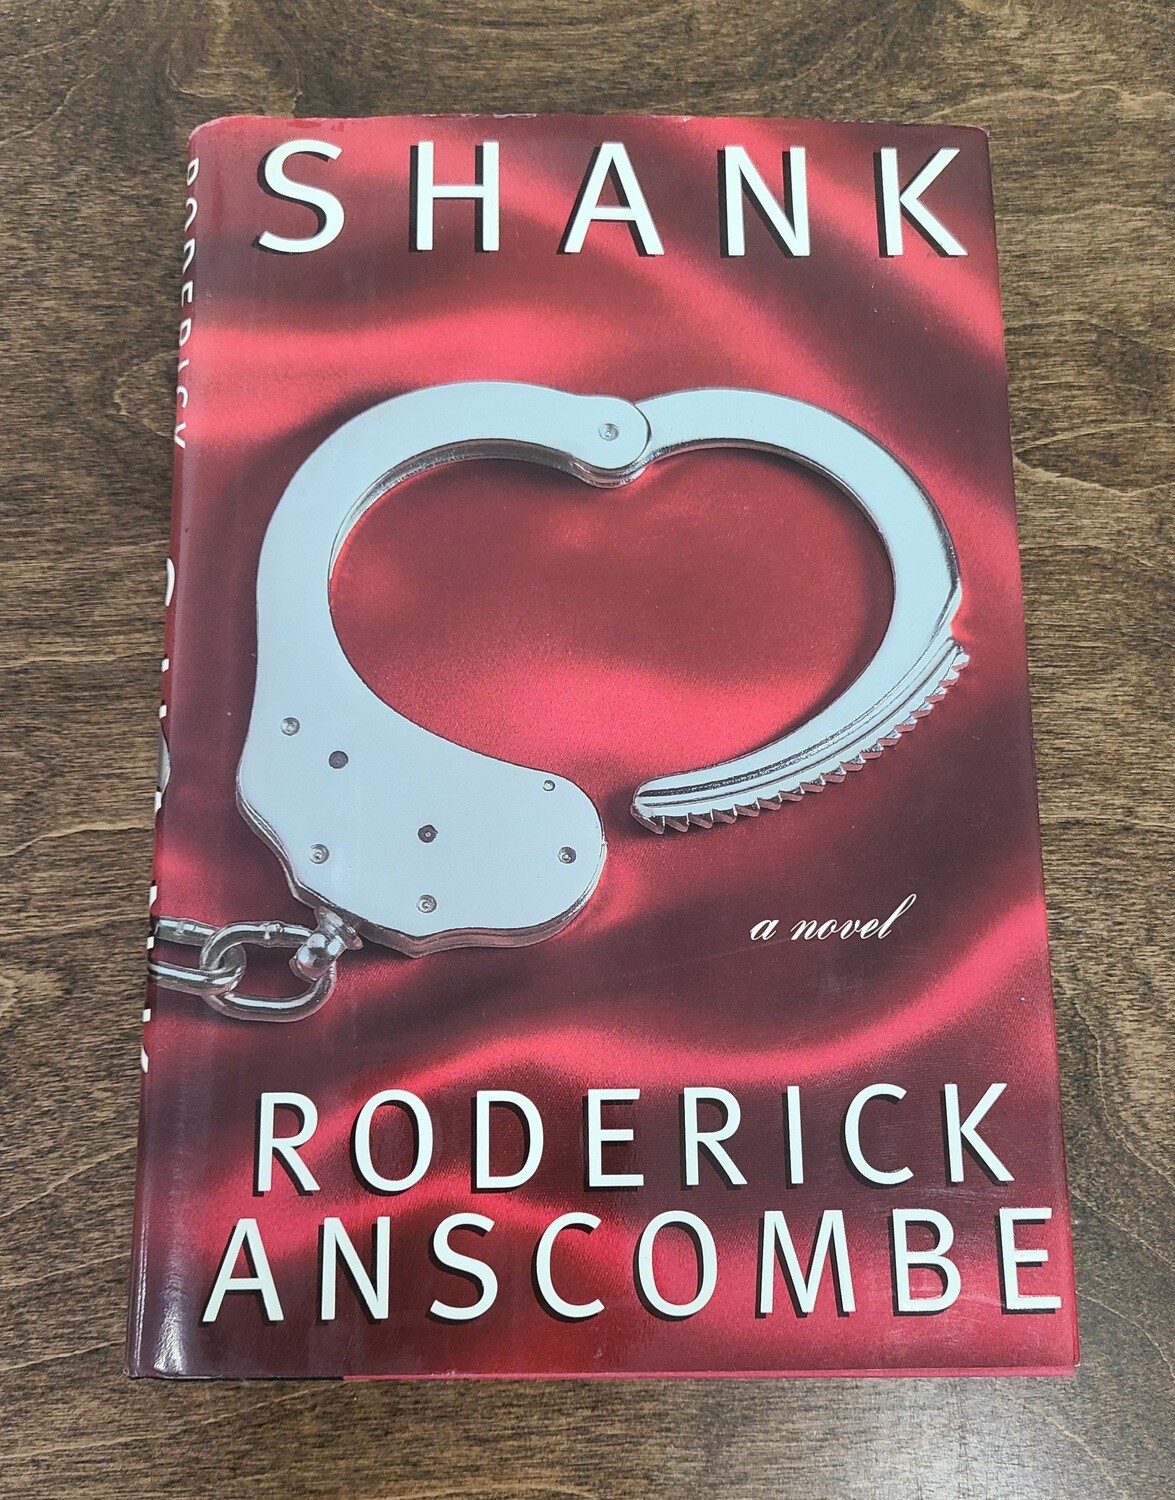 Shank by Roderick Anscombe